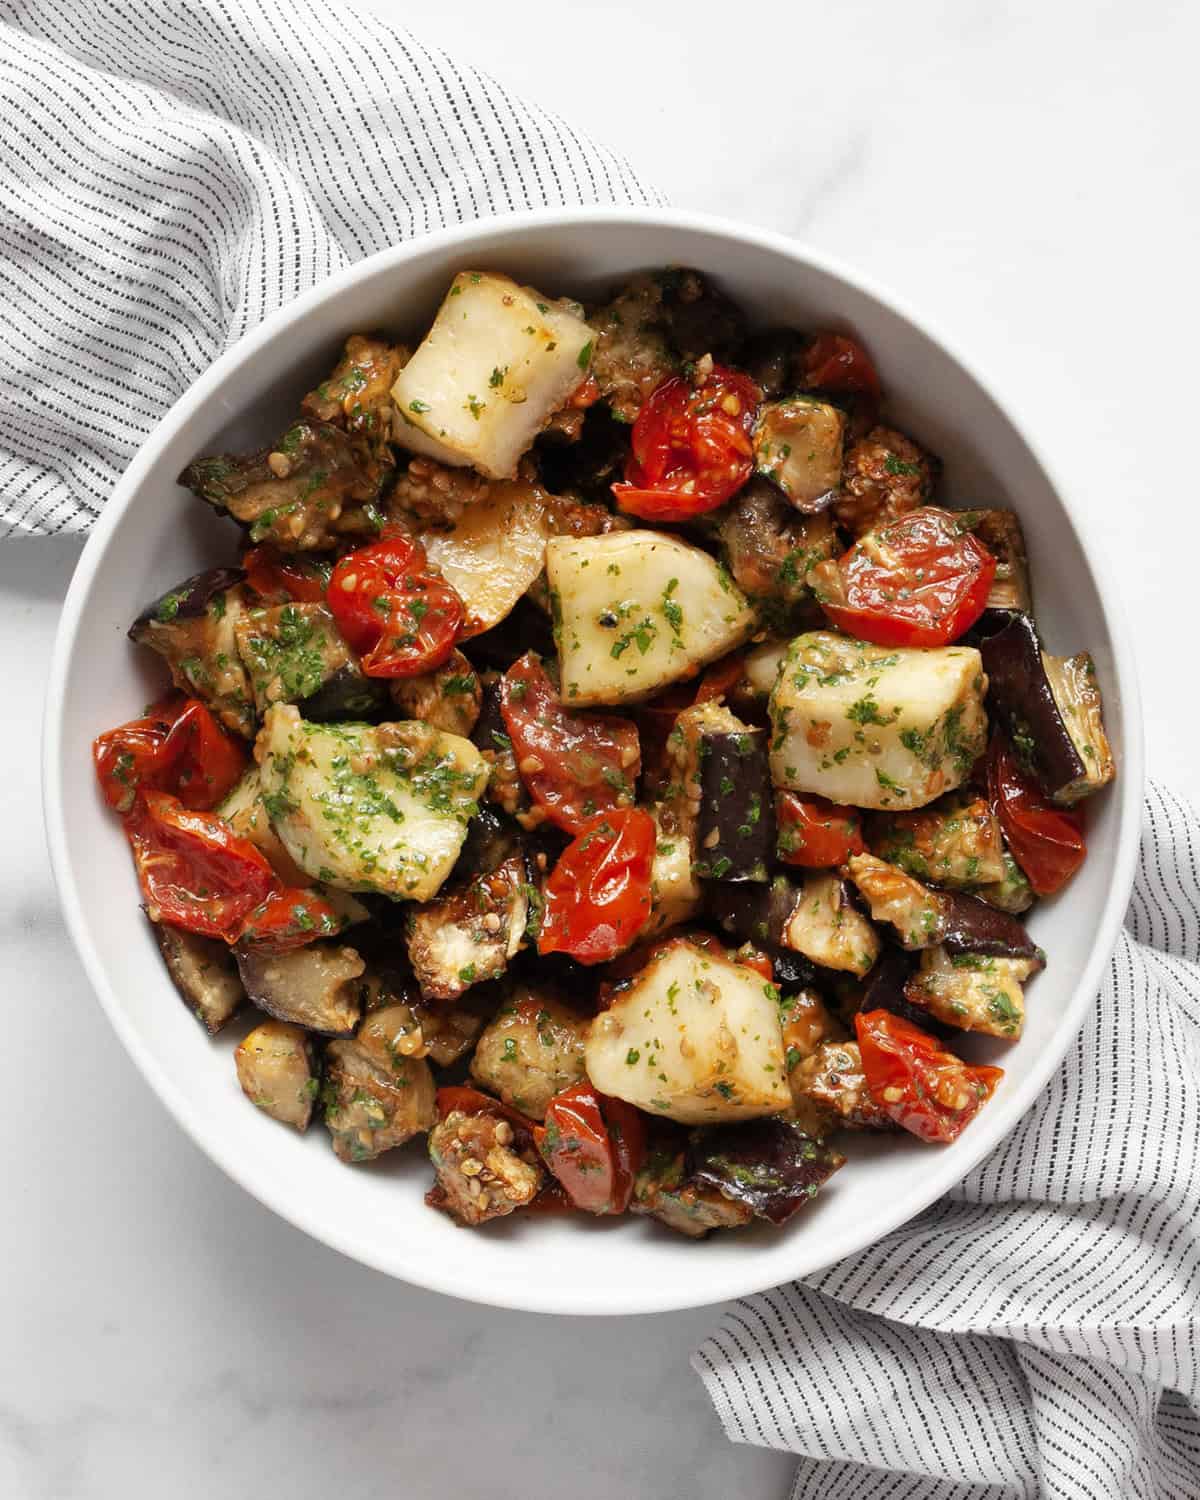 Roasted eggplant, tomatoes and halloumi in a bowl.